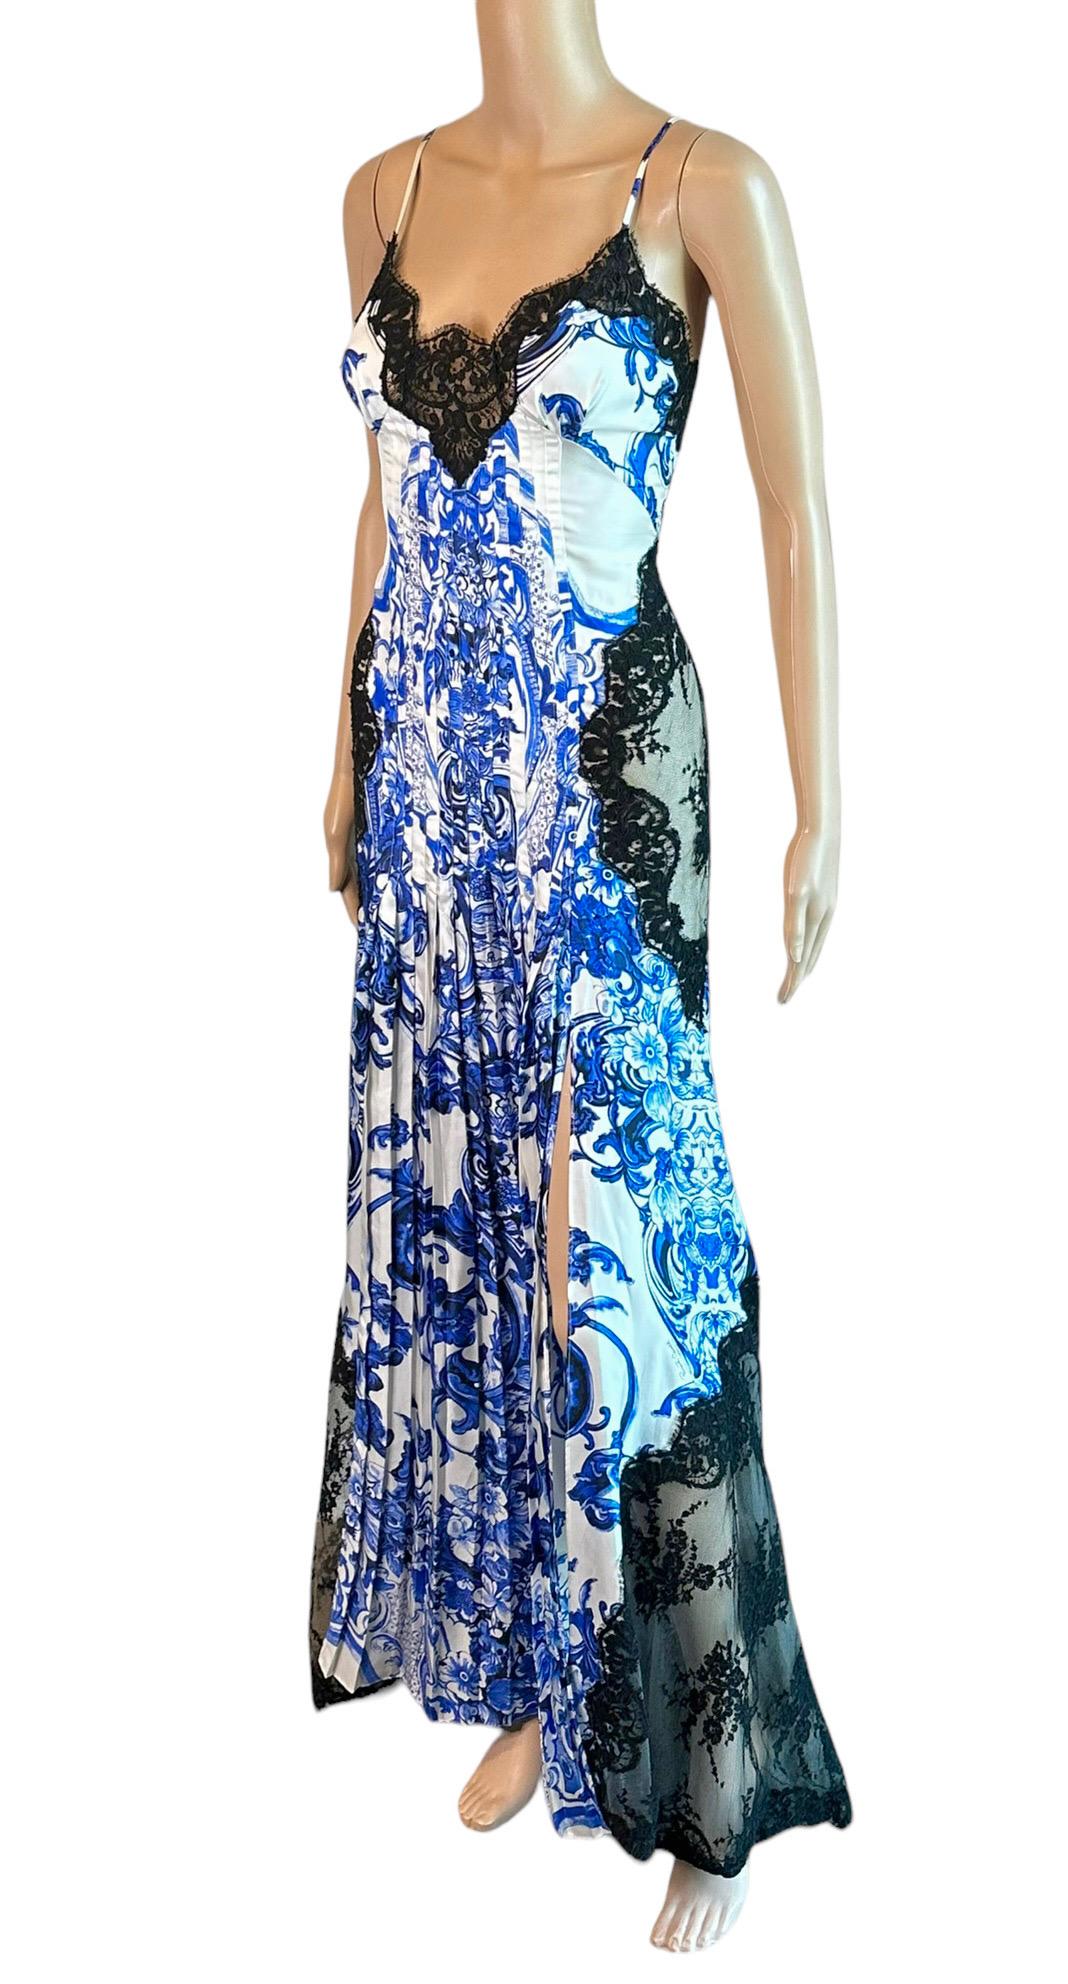 Roberto Cavalli Resort 2013 Chinoiserie Ming Porcelain Sheer Lace Evening Dress For Sale 7